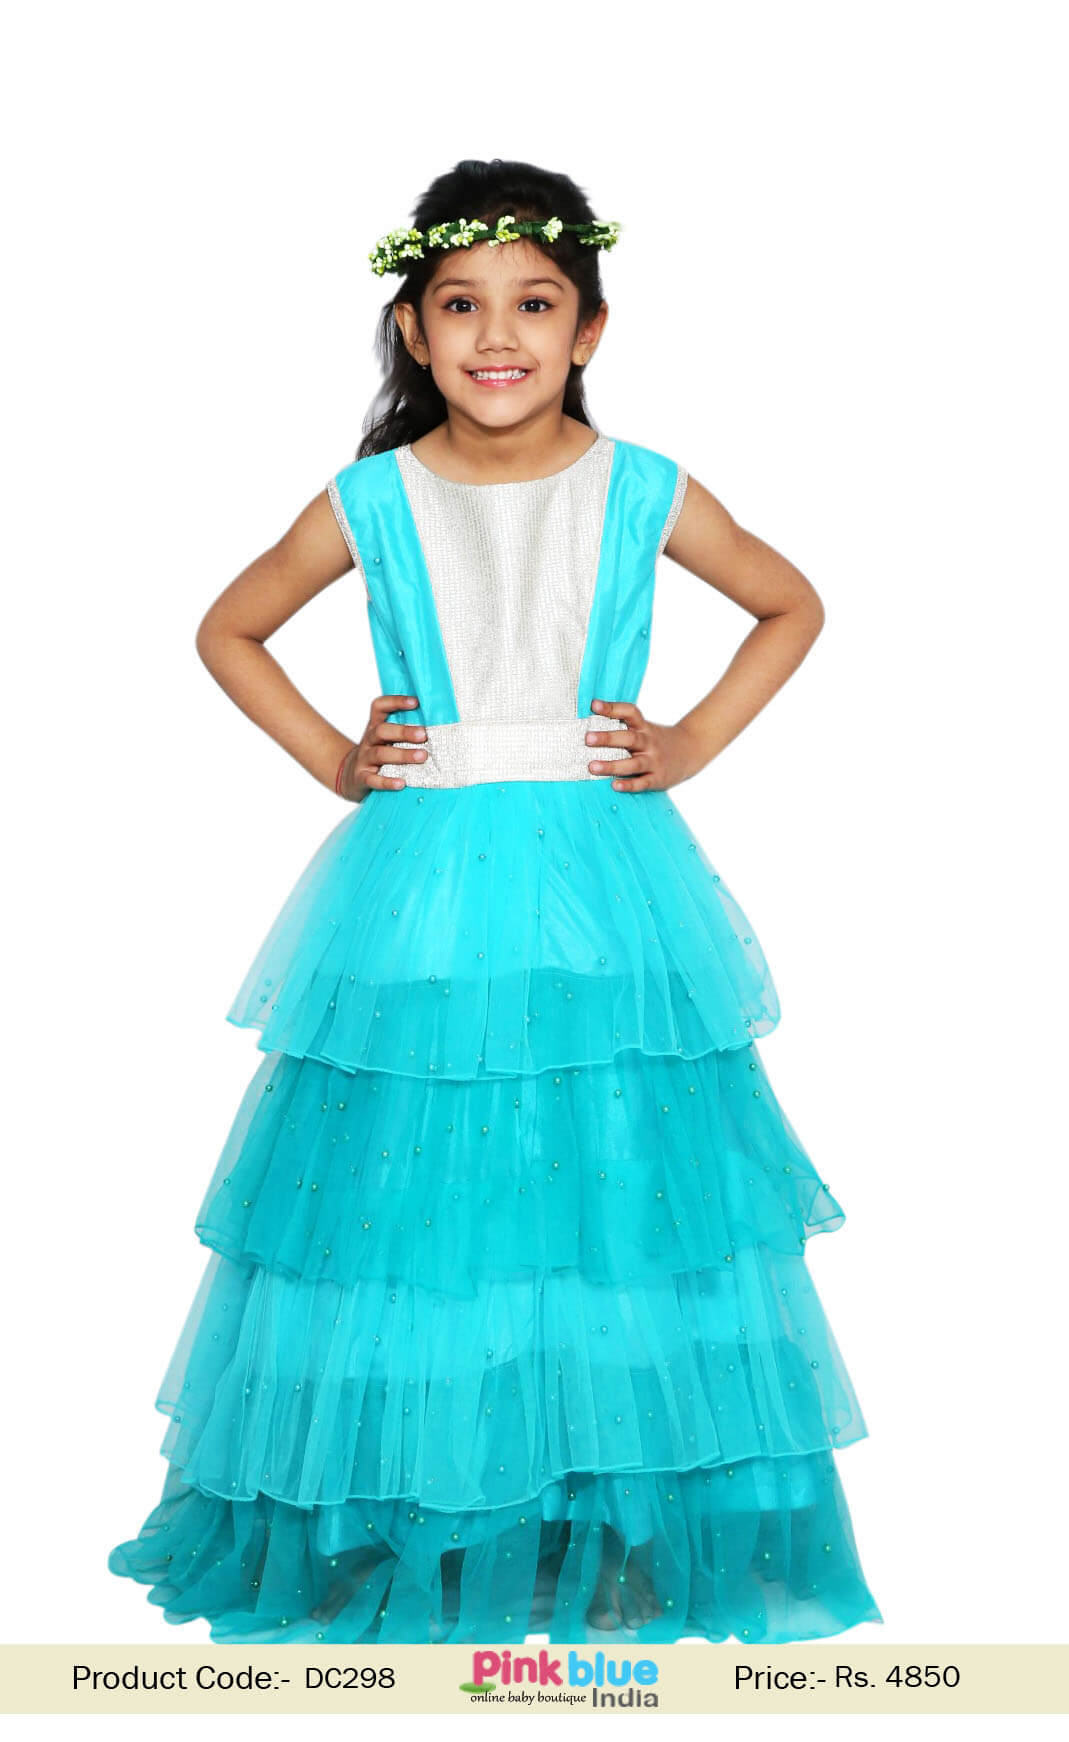 Buy Kids Party Wear, Birthday Frocks, Designer Gowns Online in India |  Dresses kids girl, Baby party dress, Pretty dresses for kids